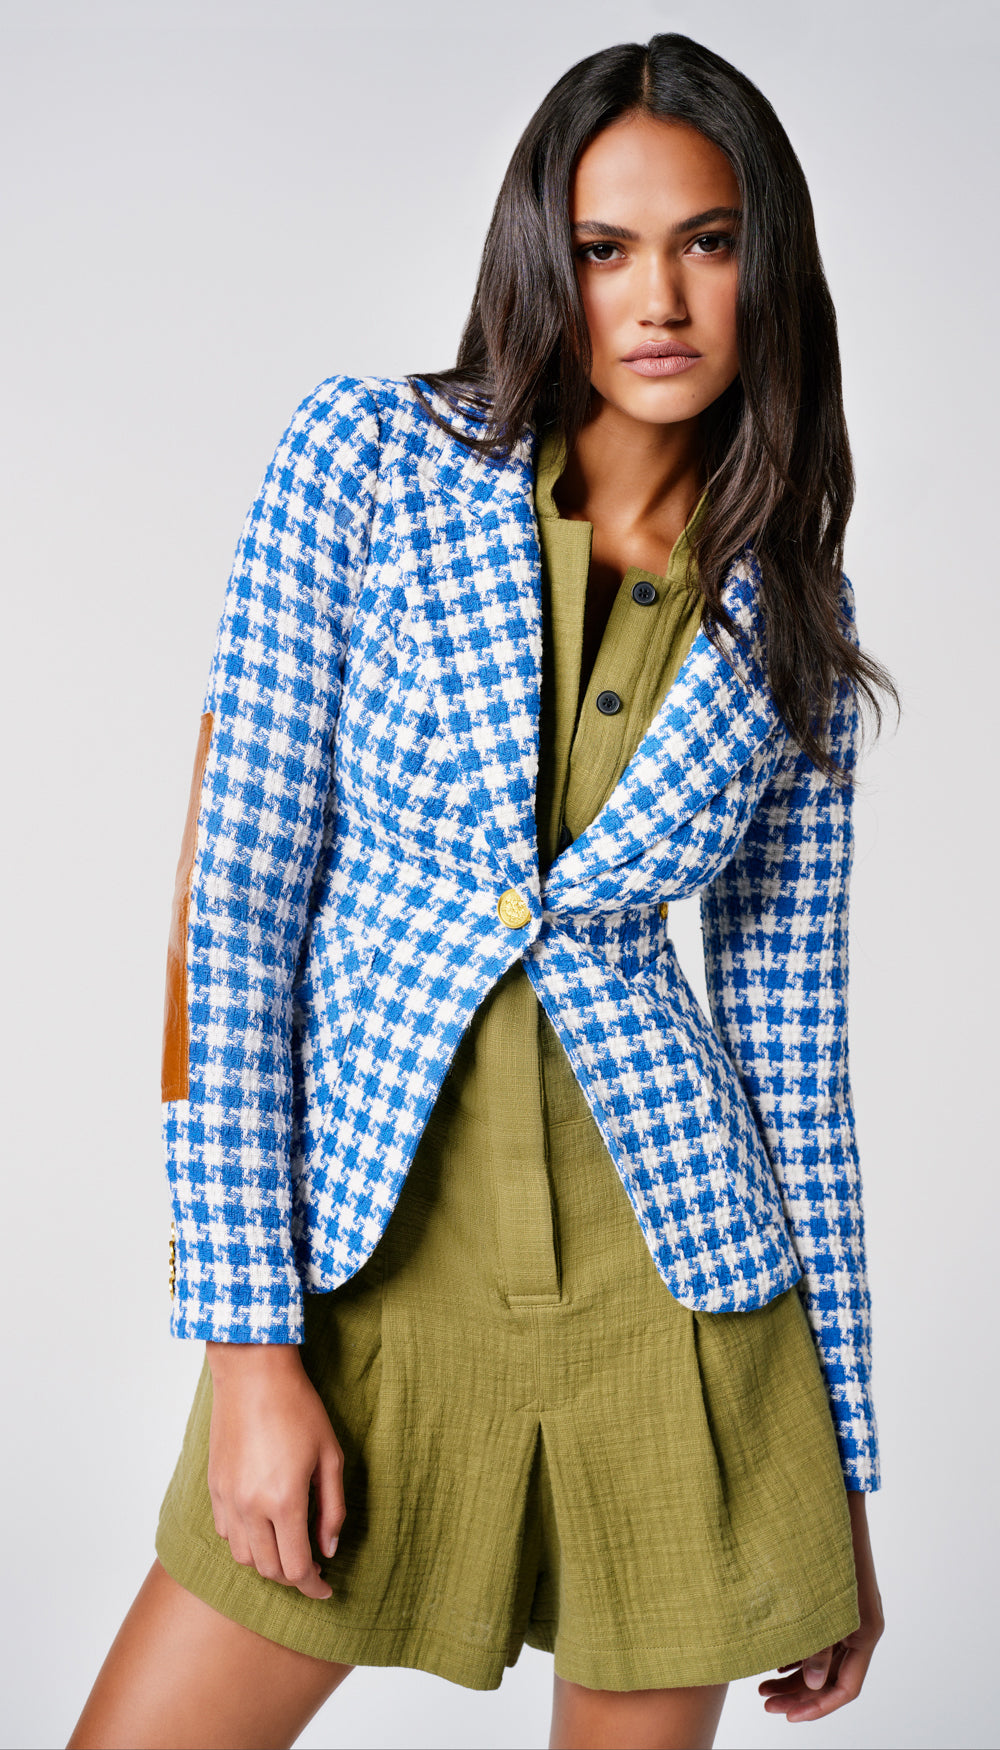 A woman in a blue and white houndstooth blazer.